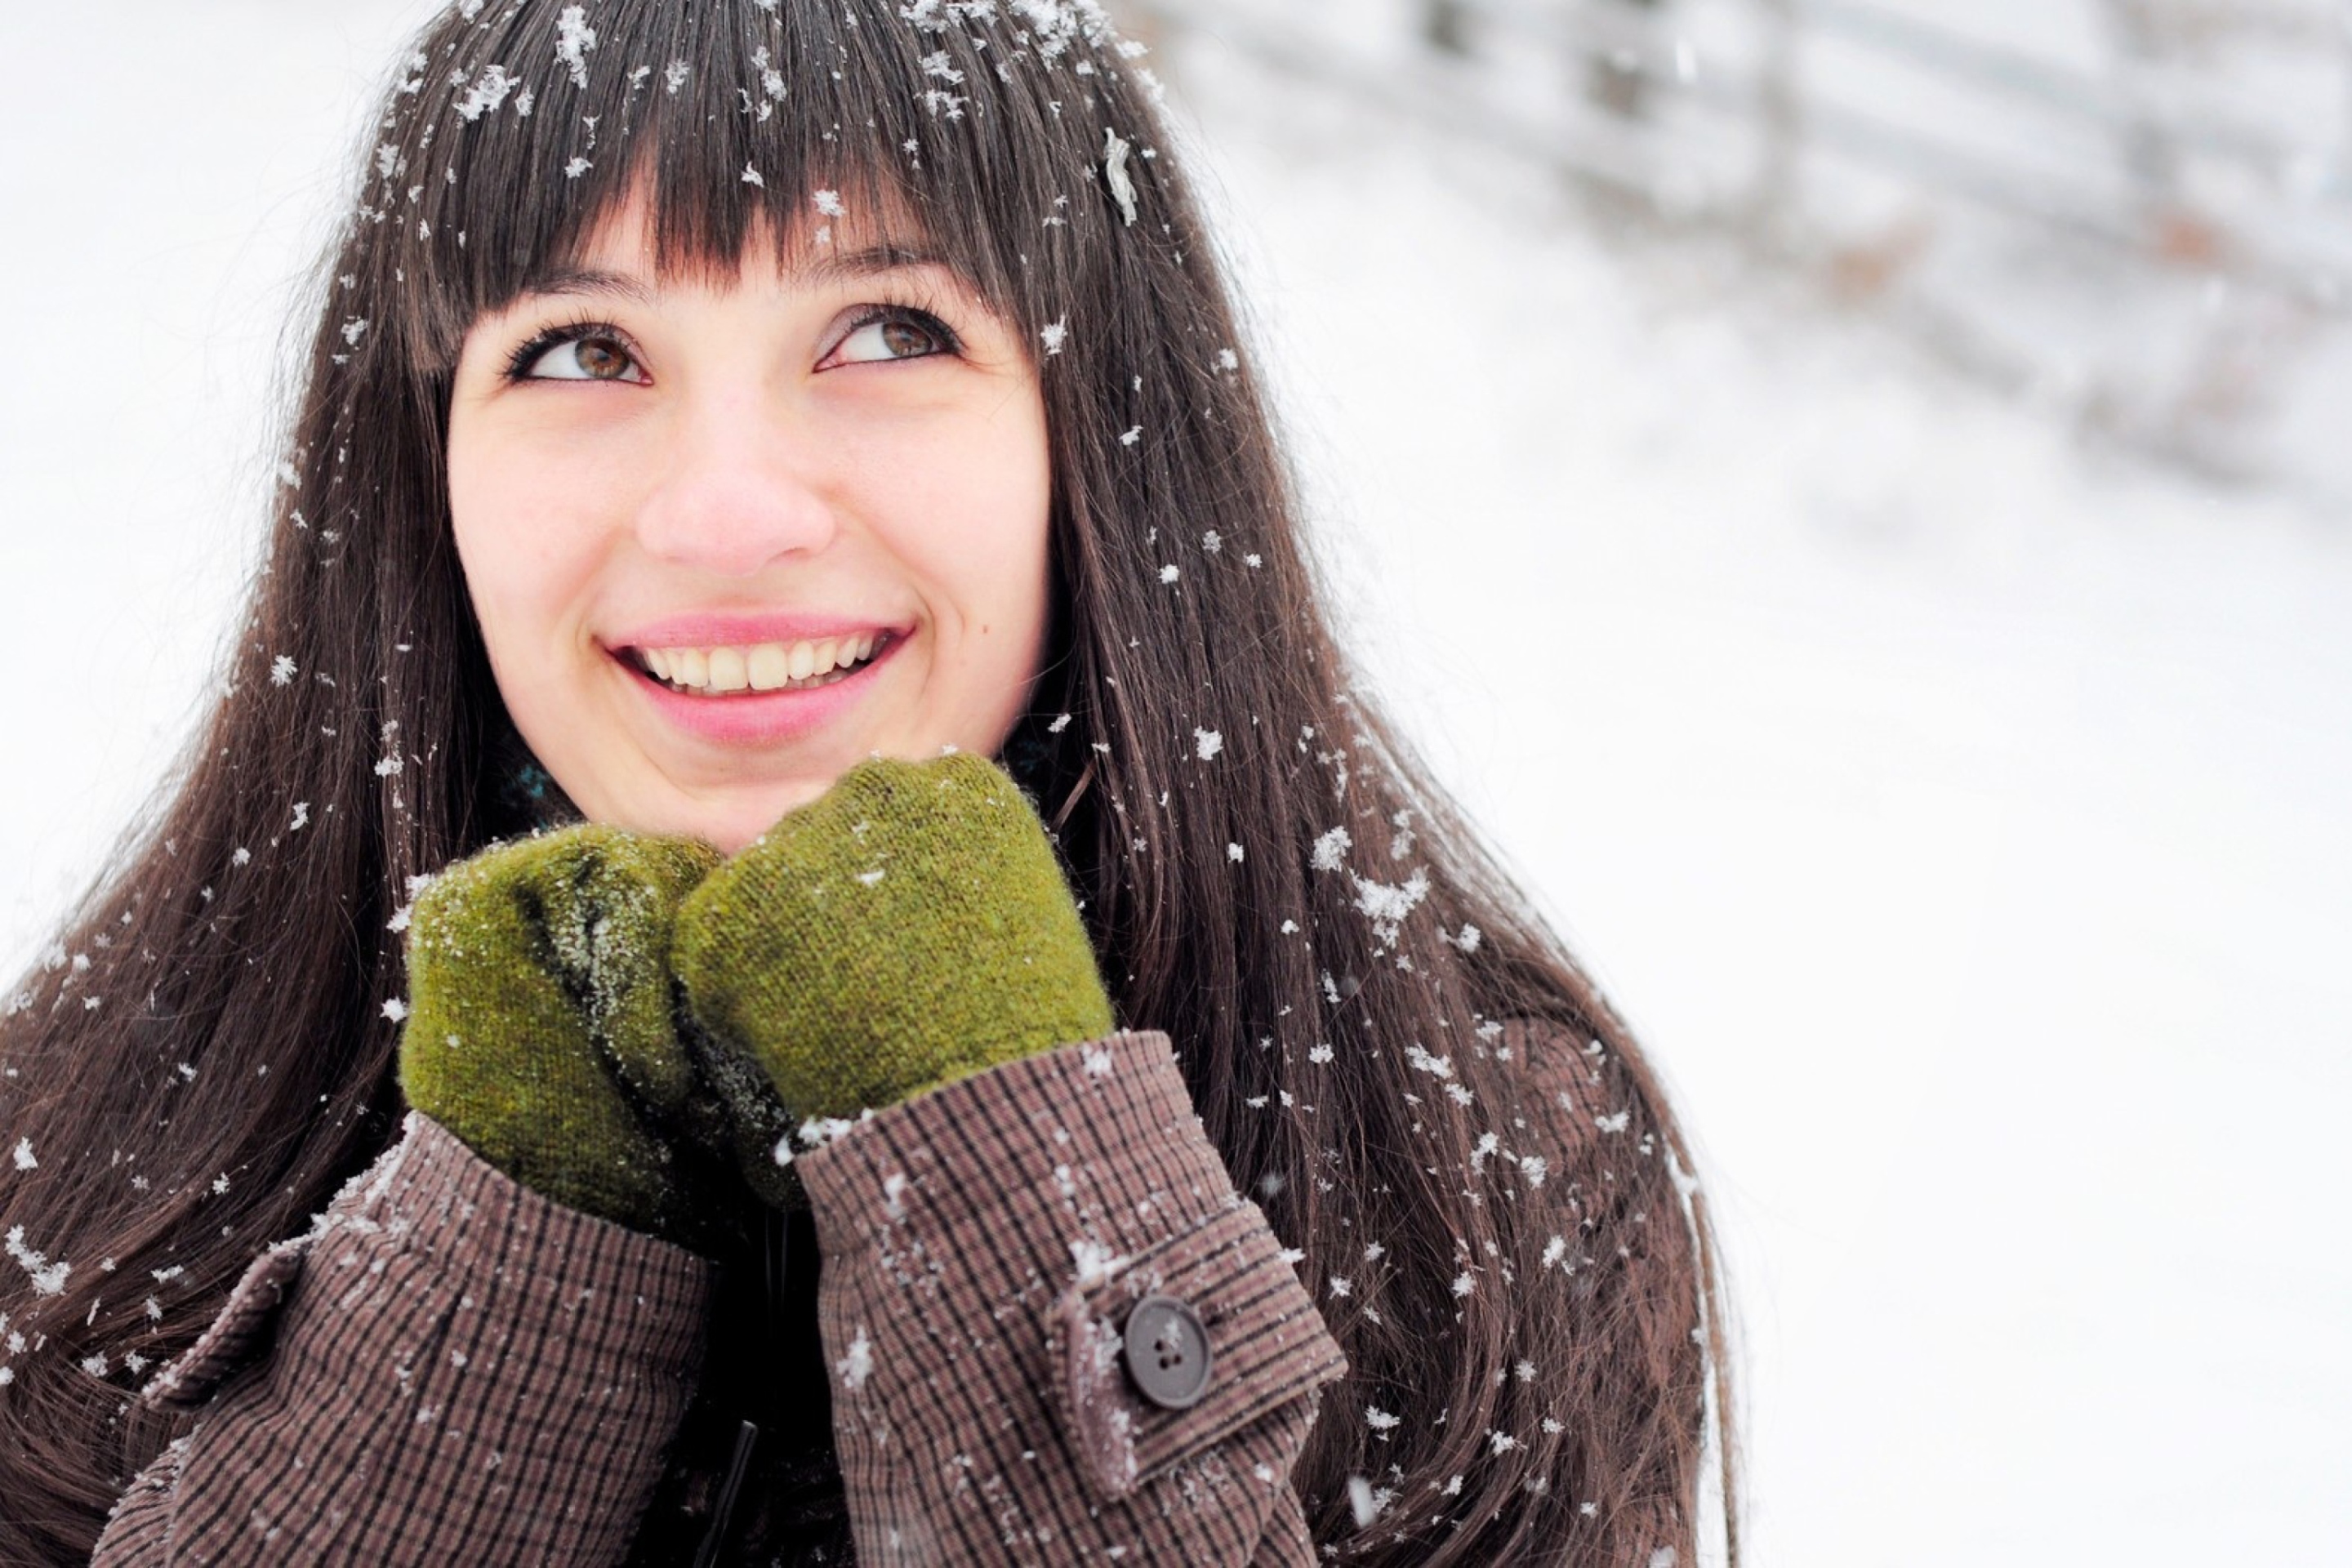 Brunette With Green Gloves In Snow wallpaper 2880x1920